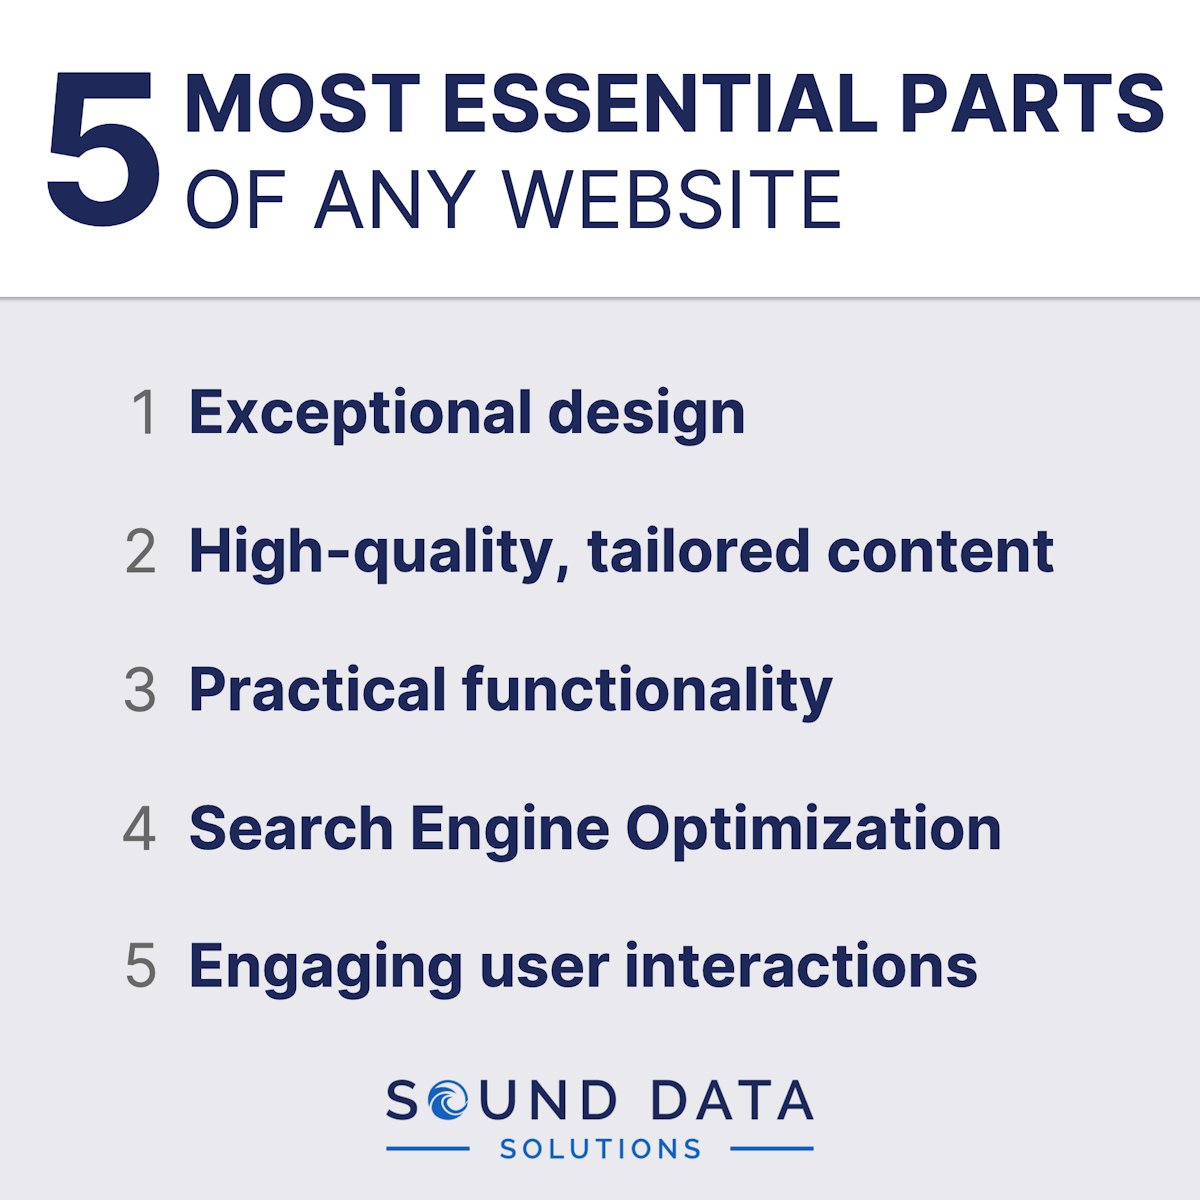 5 essential parts of any website - Infographic by Sound Data Solutions